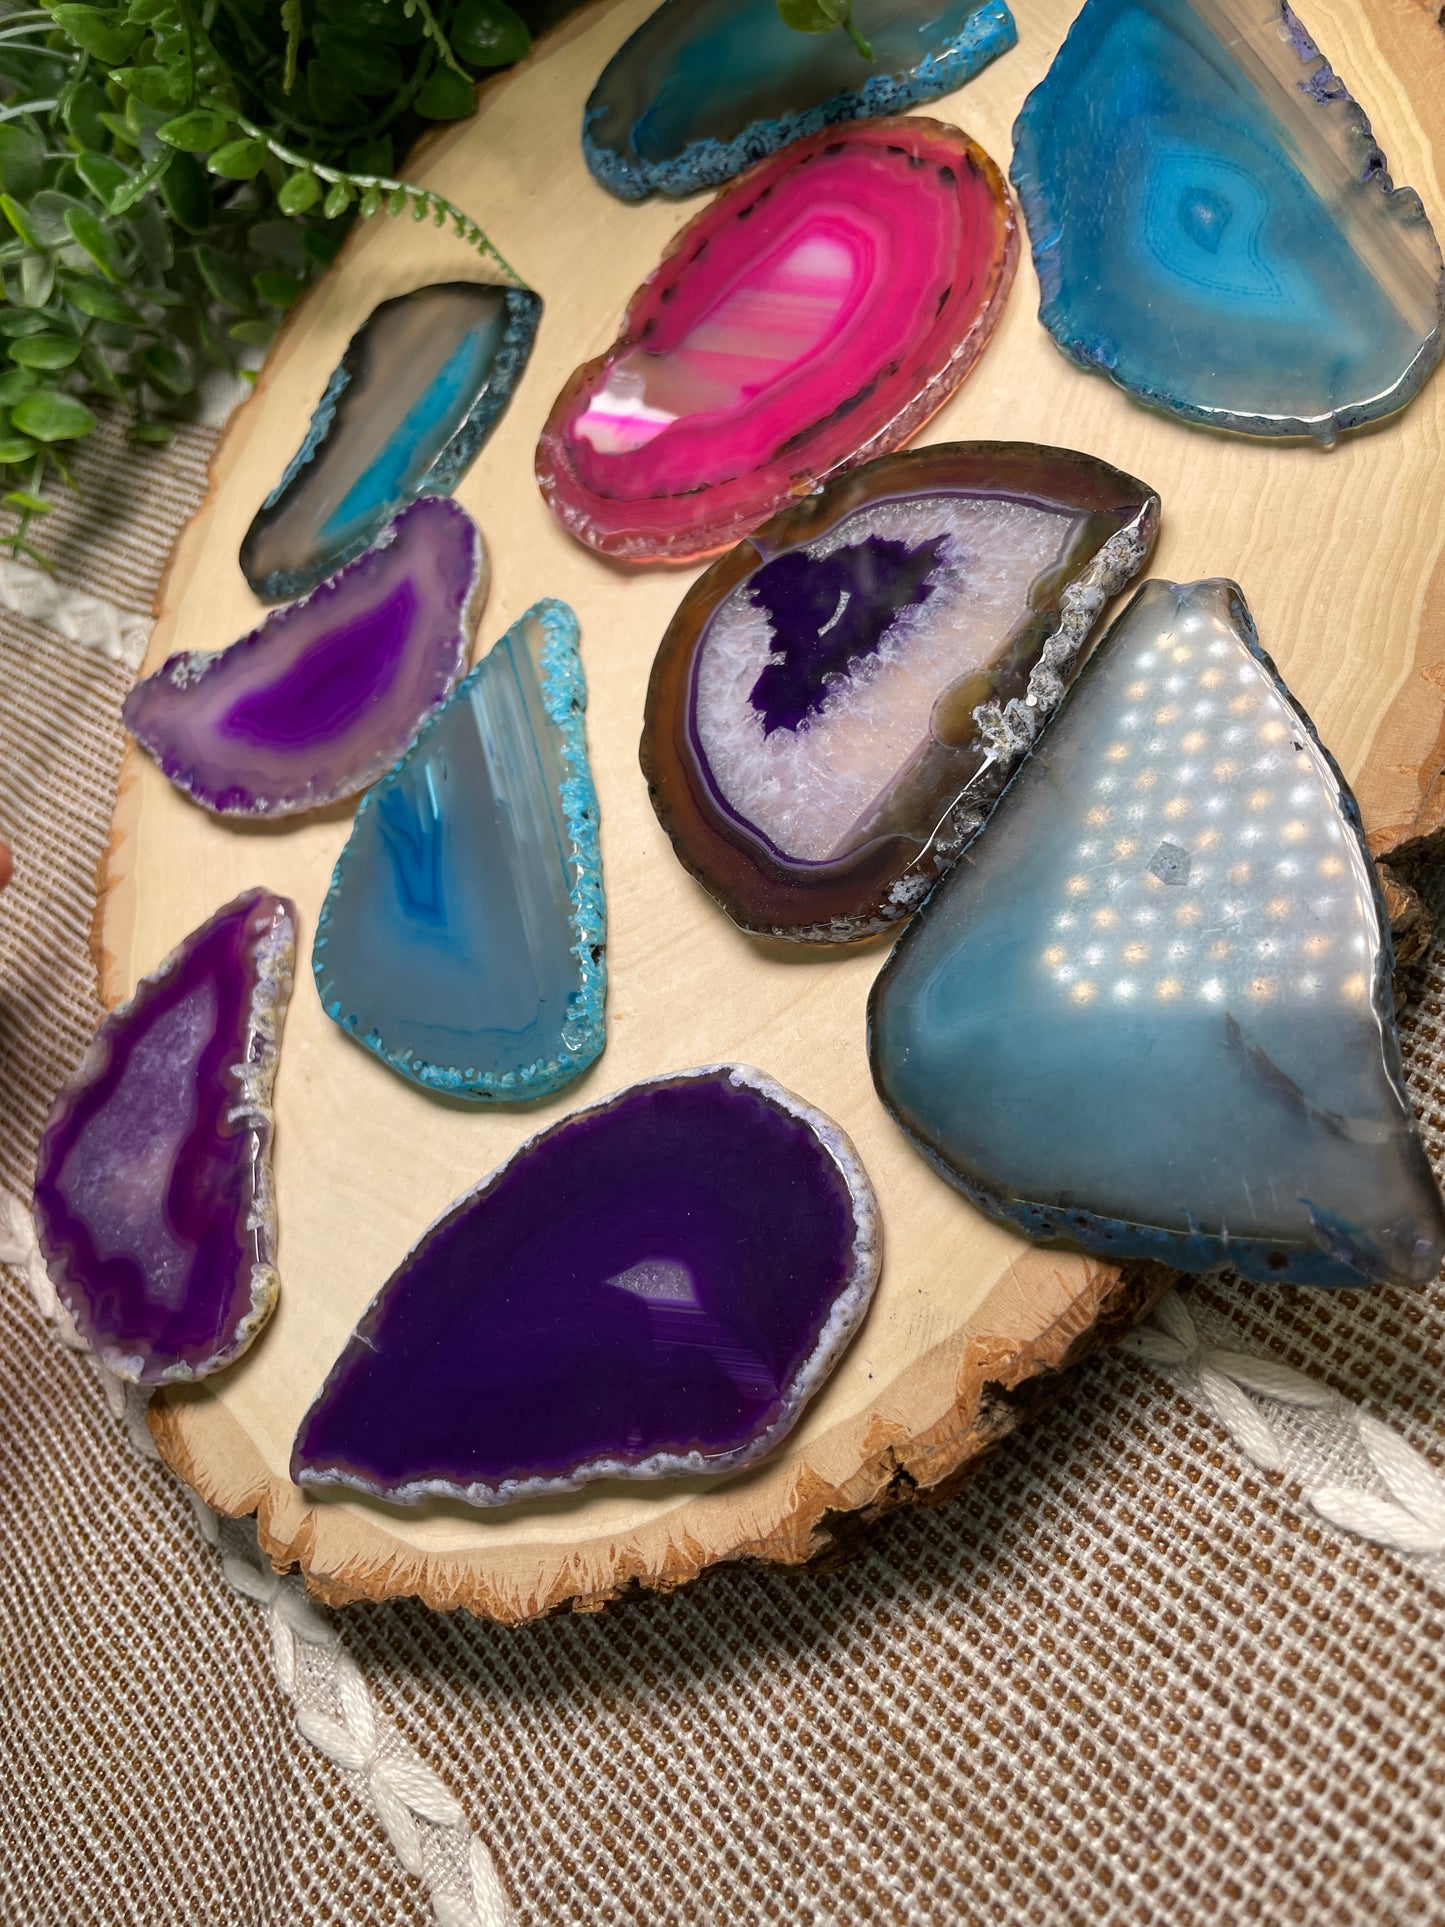 Dyed Agate Slice